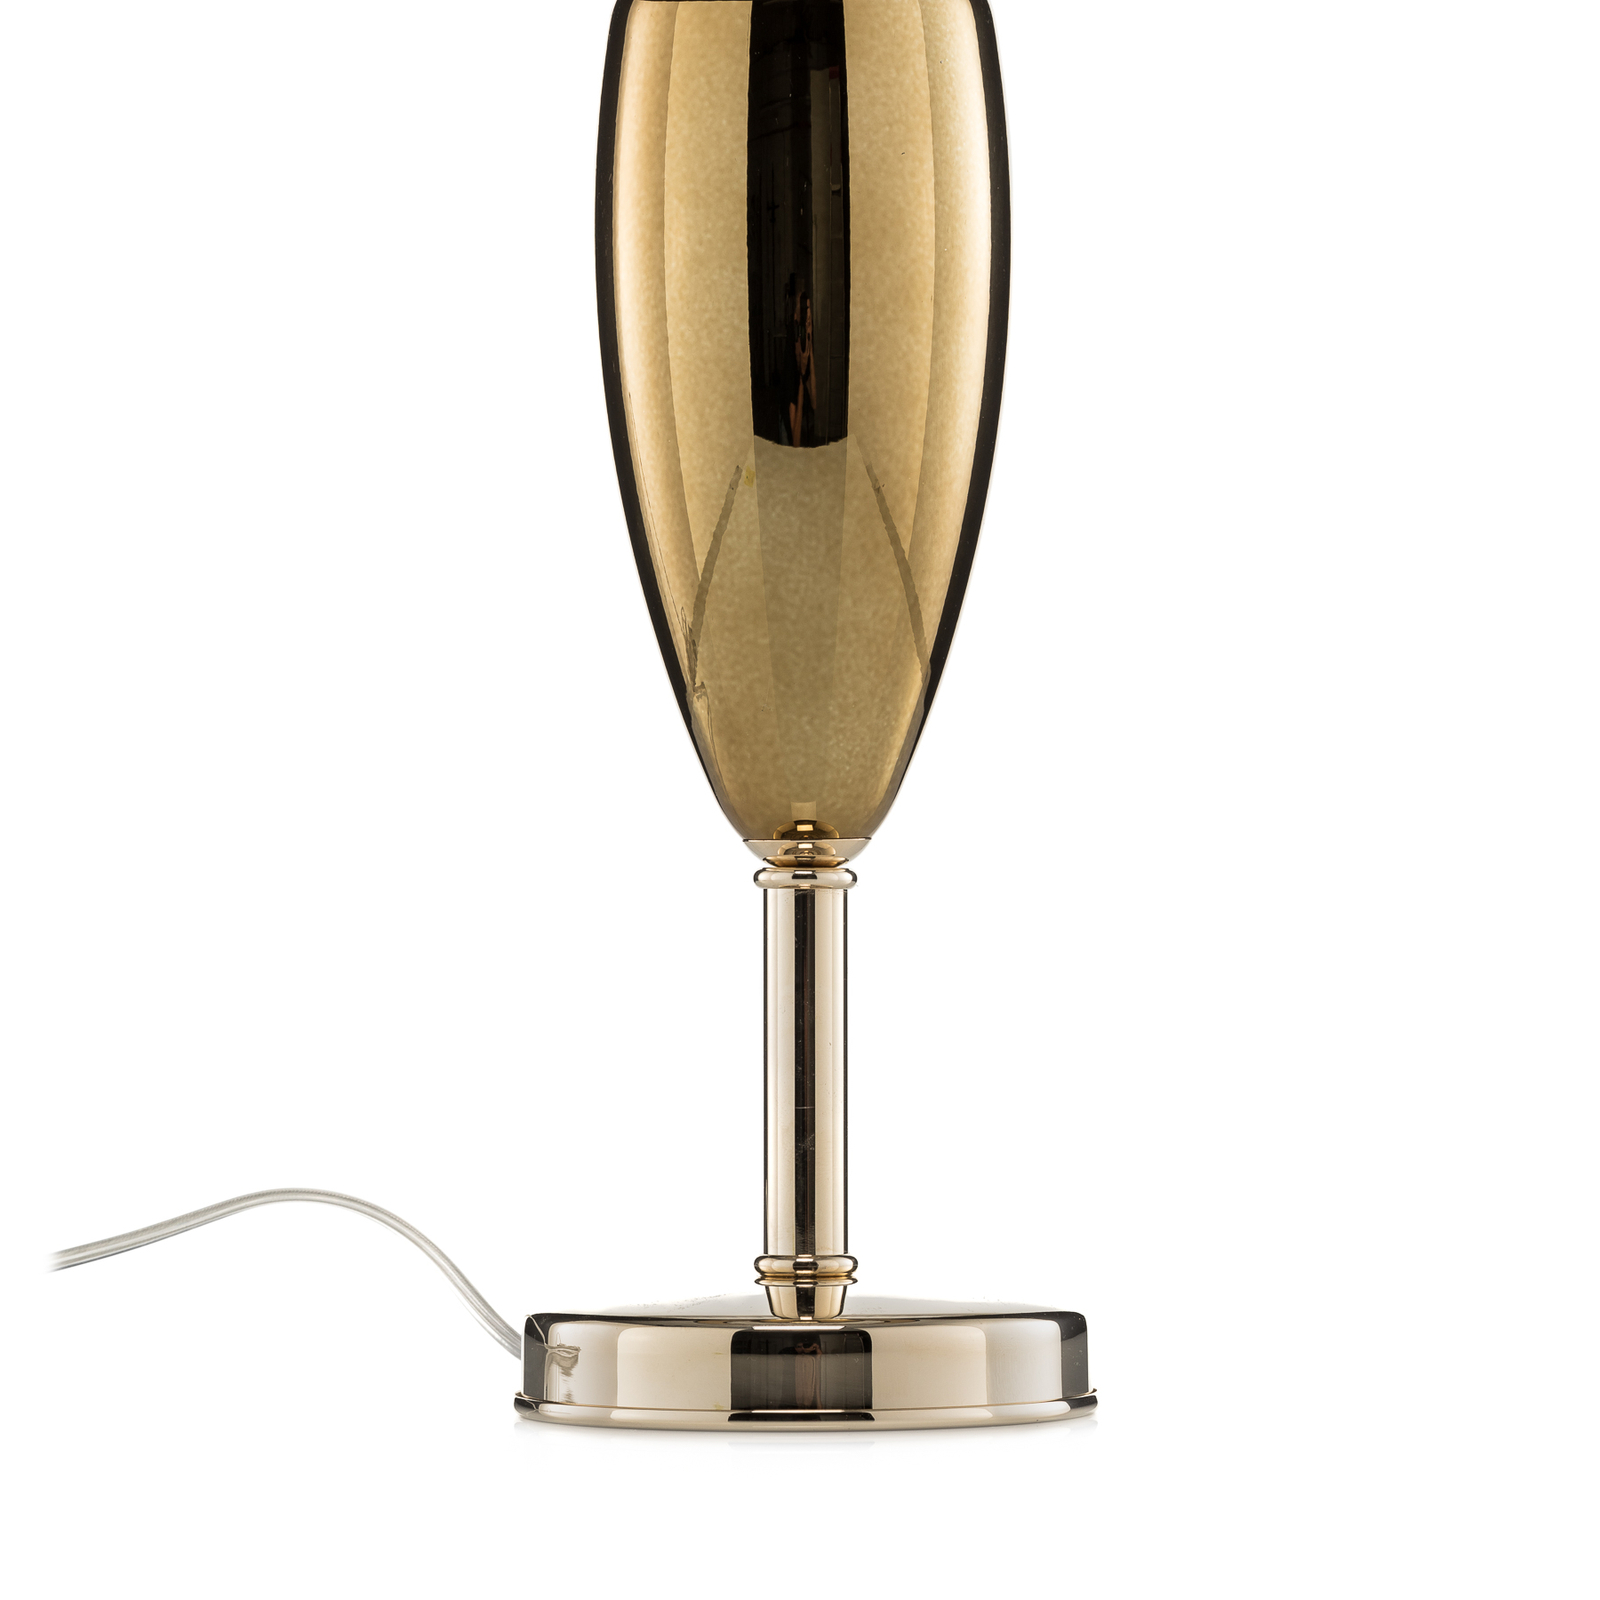 Show Ogiva - black and gold textile table lamp